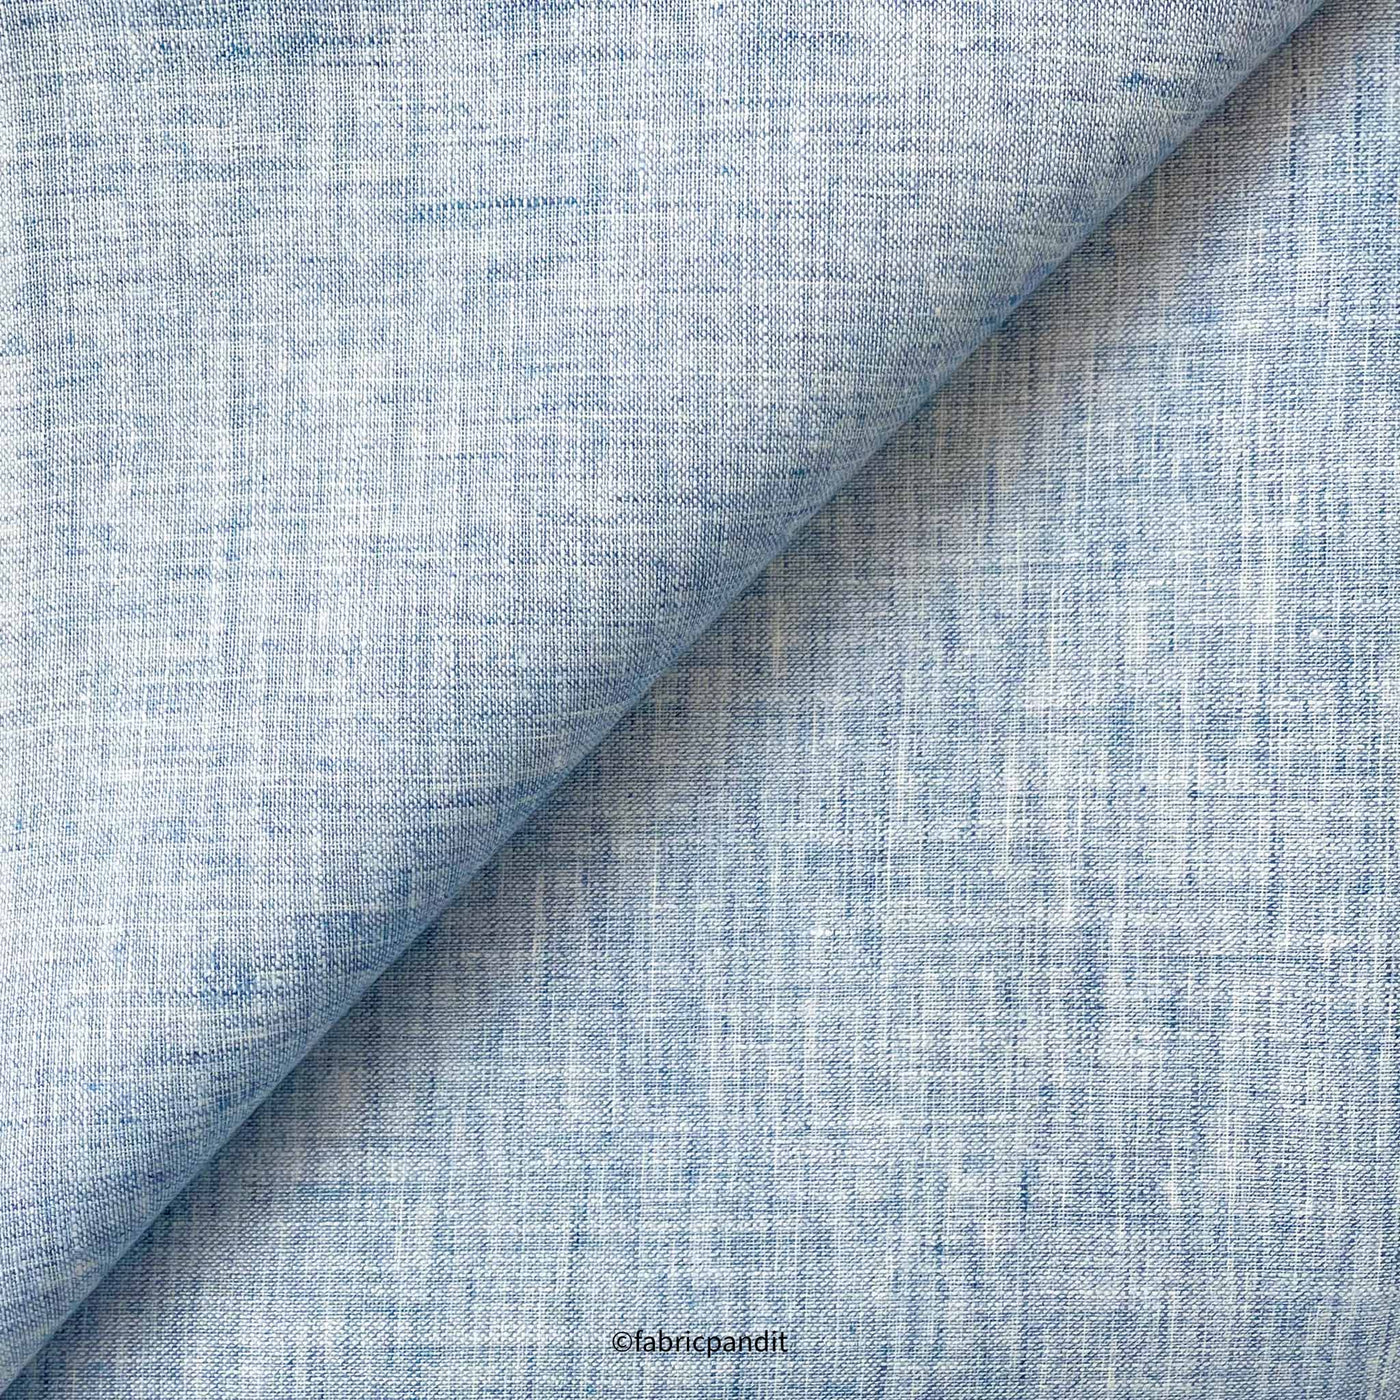 Fabric Pandit Fabric Men's Faded Denim Blue Textured Yarn Dyed Linen Shirting Fabric (Width 58 Inches)